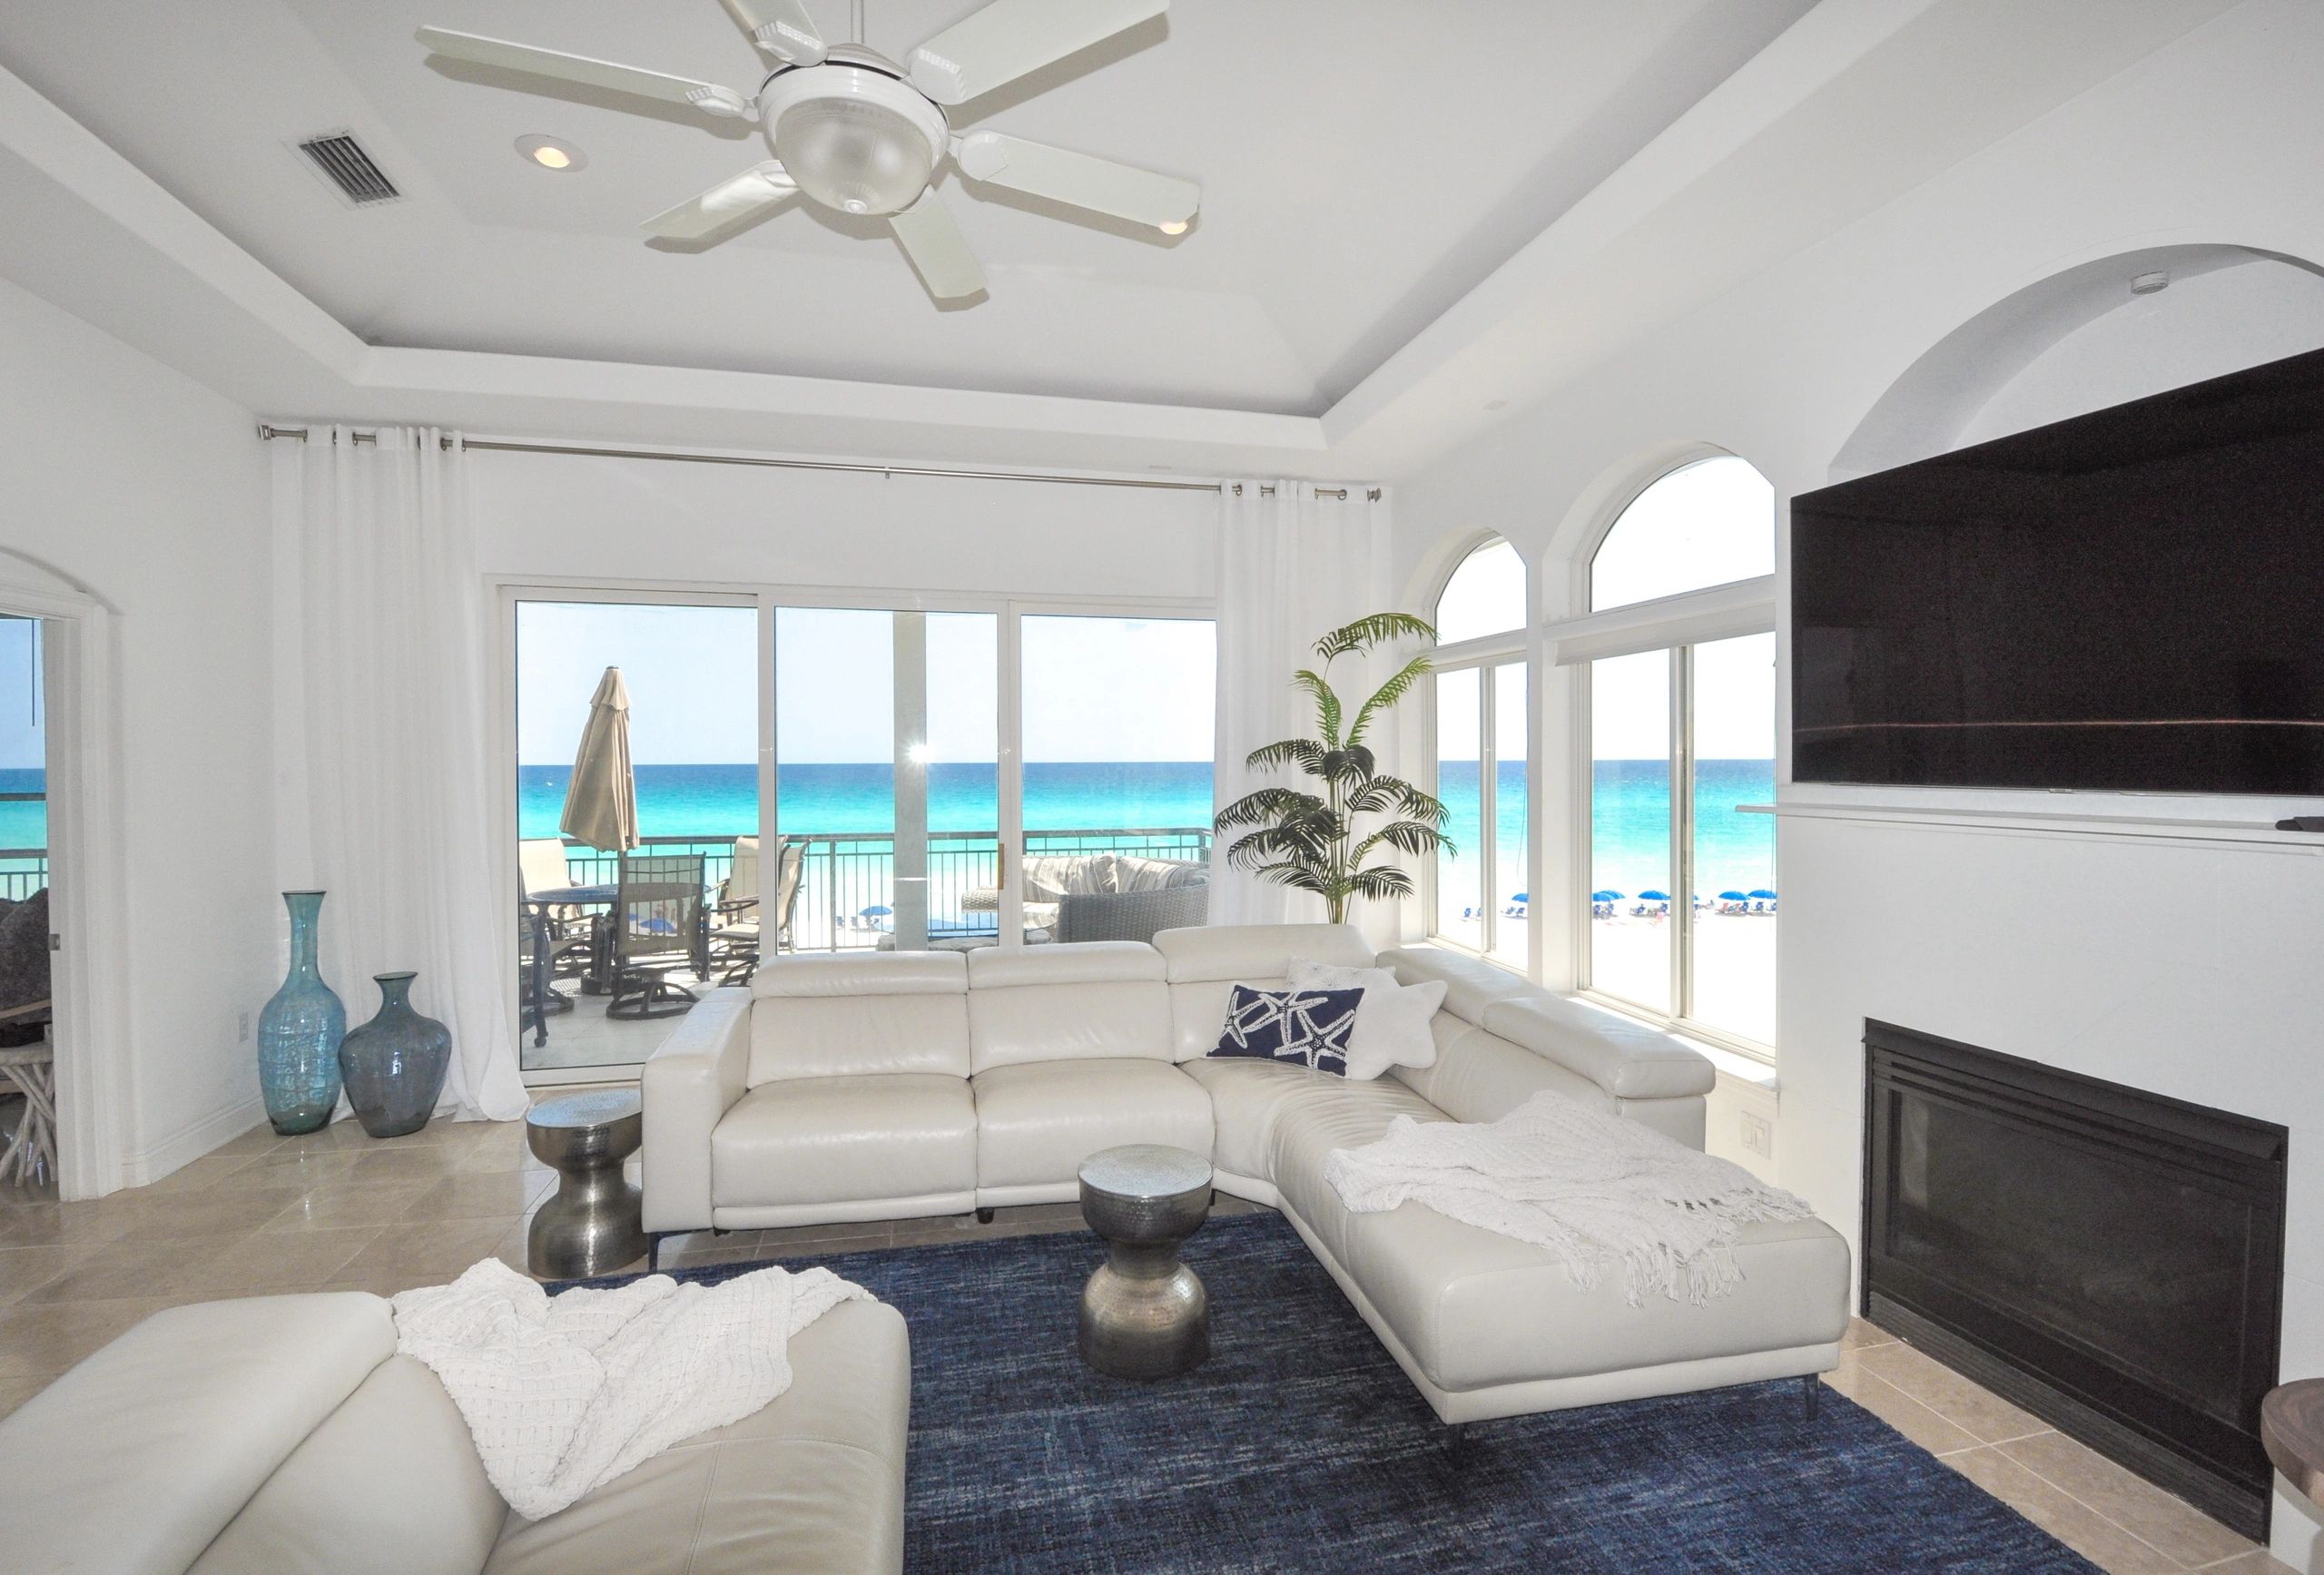 Main living area with amazing gulf views